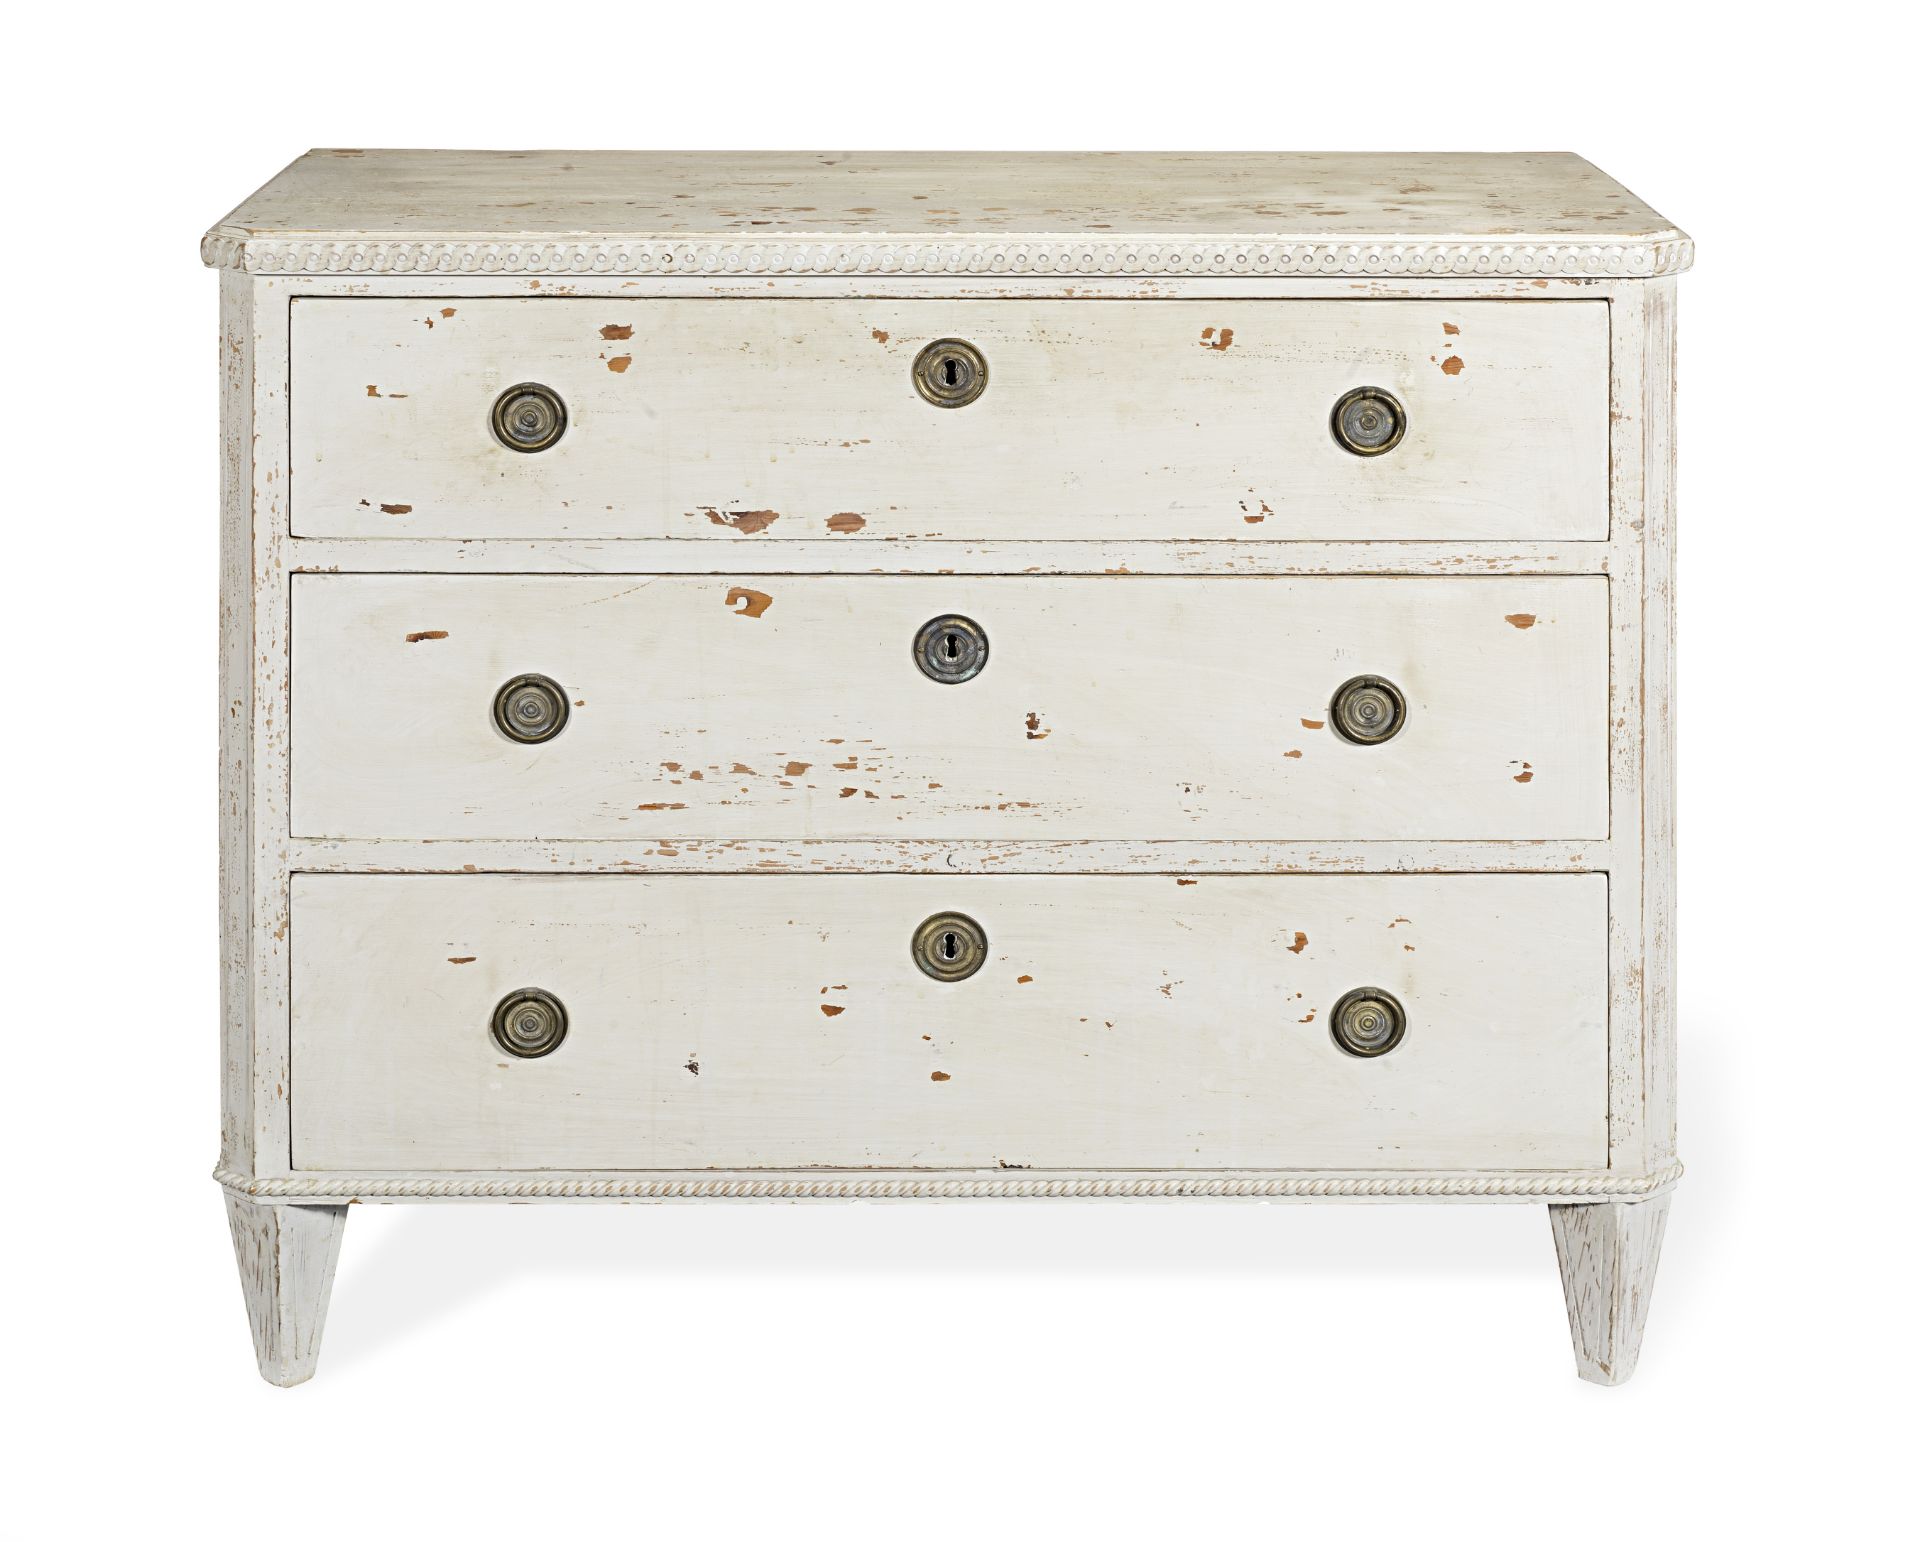 A Gustavian painted pine commode